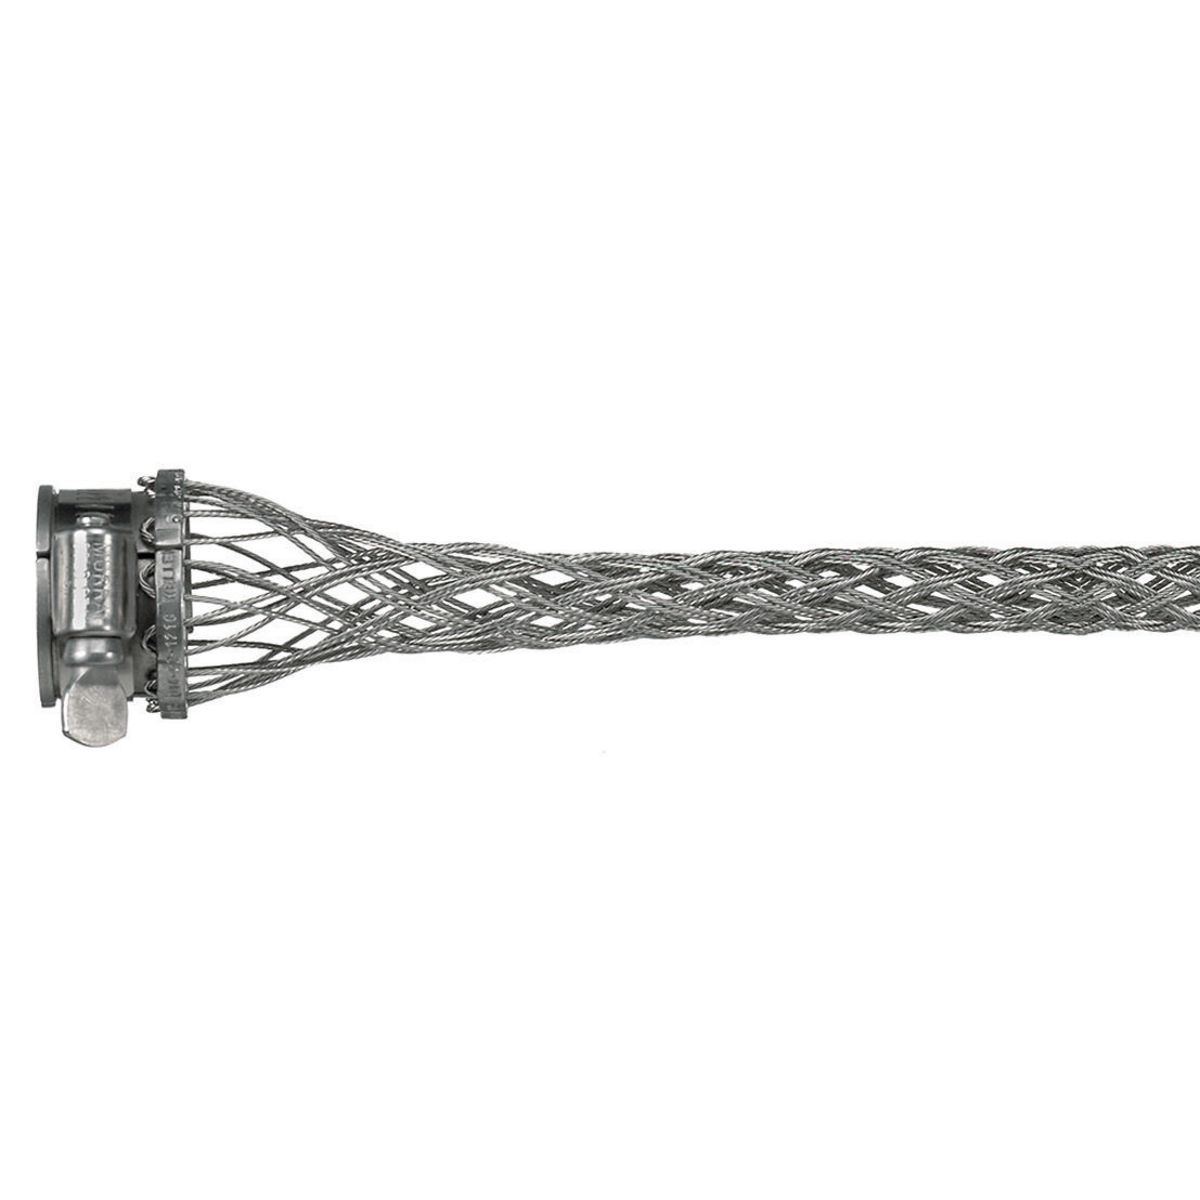 Wire Mesh Grips, Wire/Cable/Hose Management